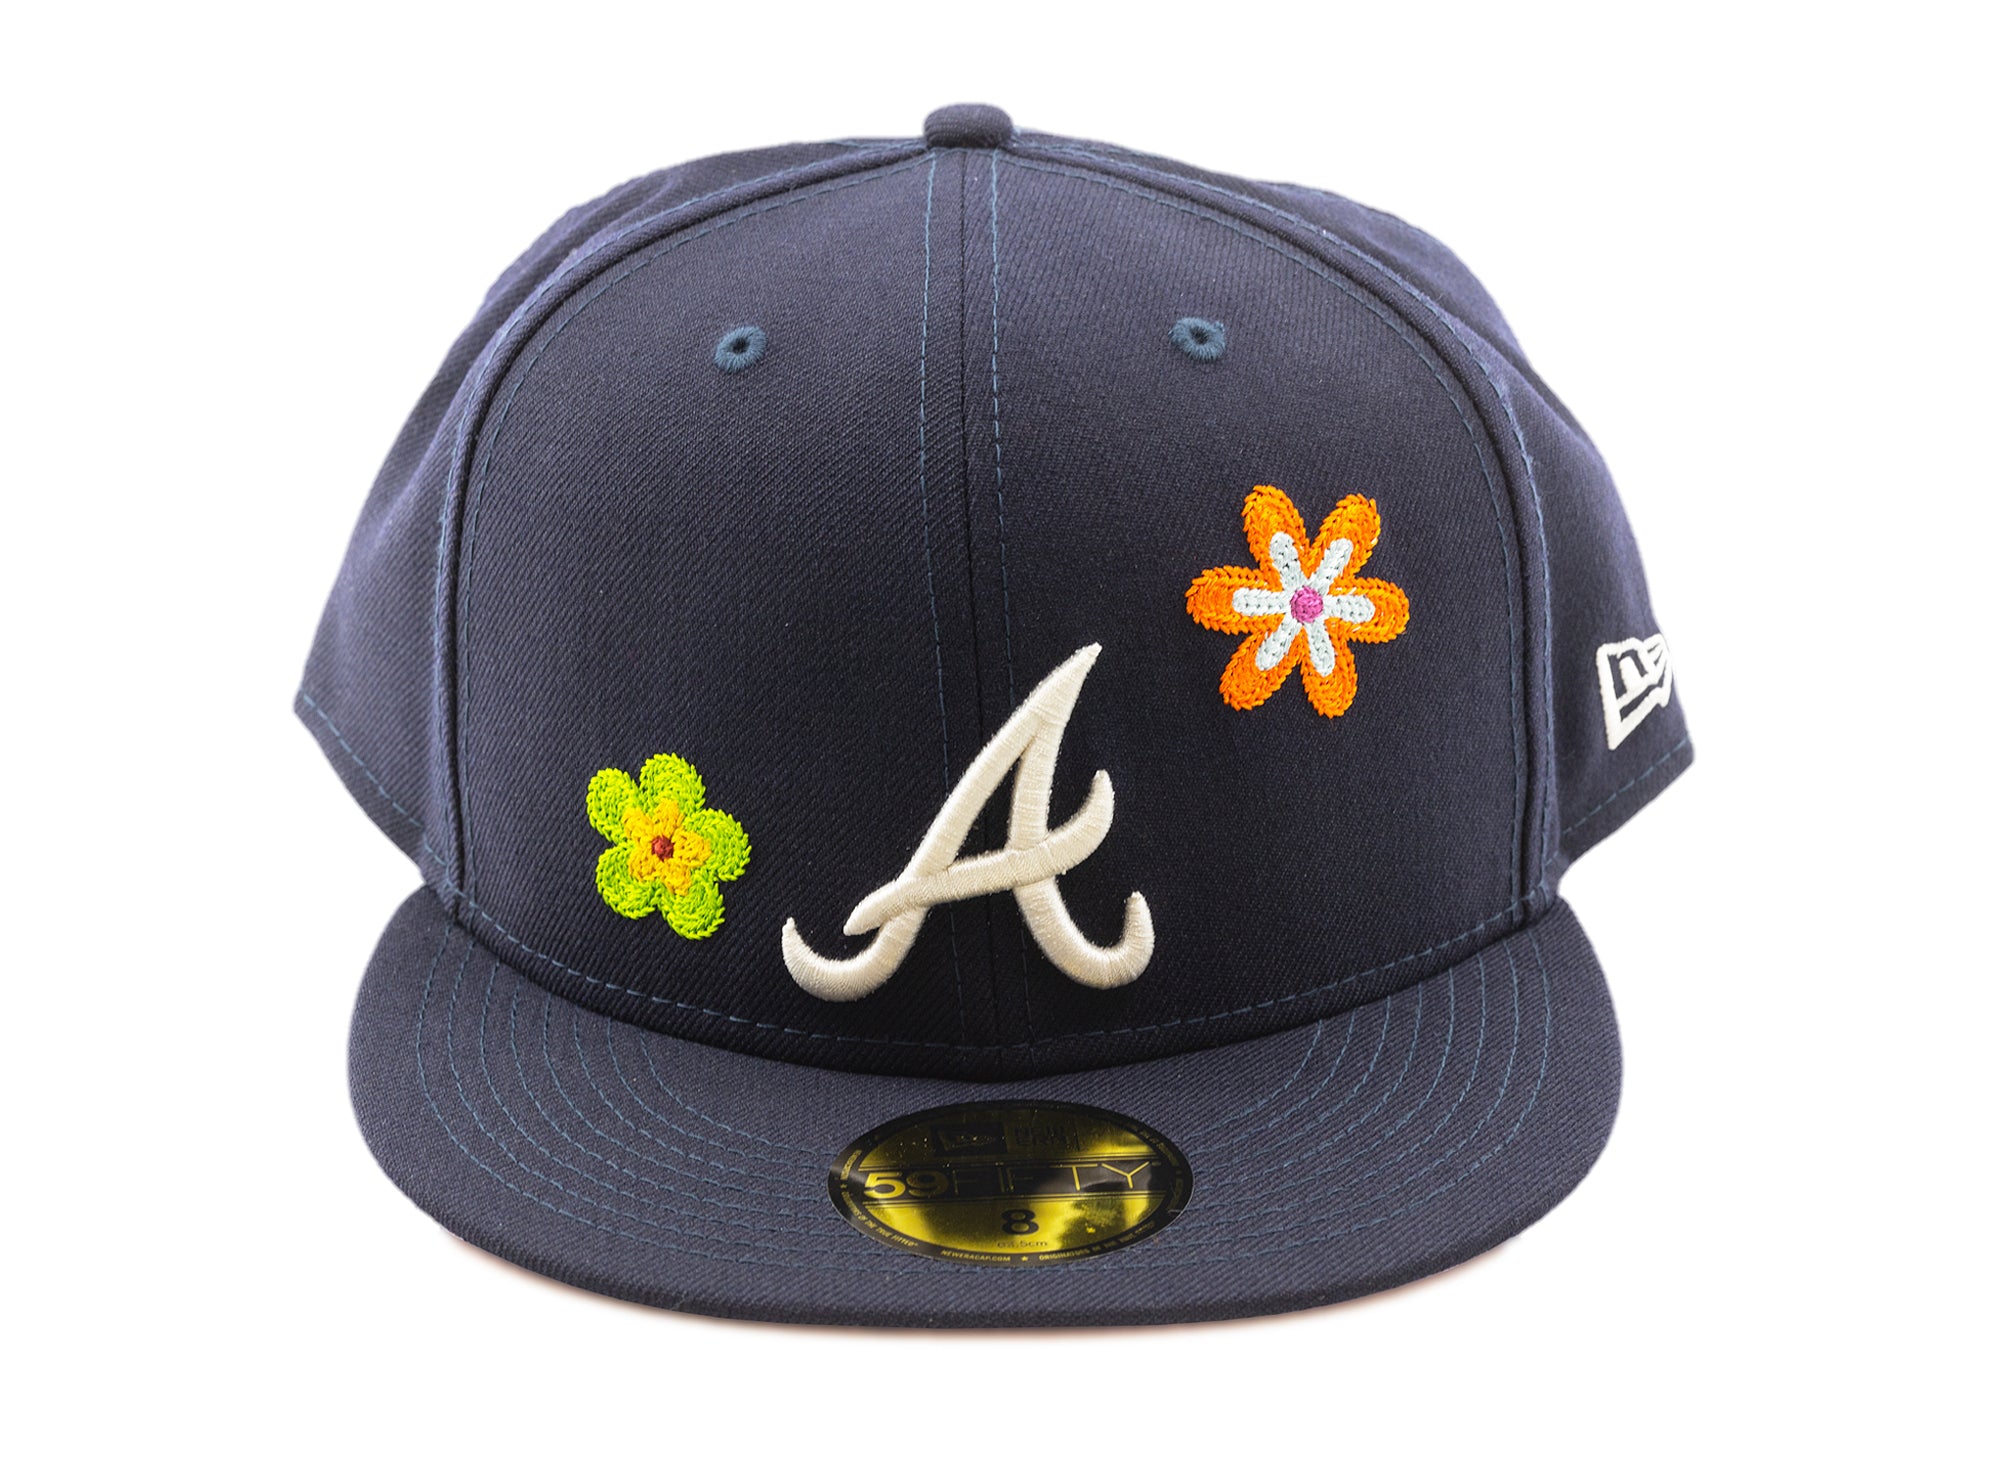 Mens Atlanta Braves Fitted Hats, Braves Fitted Caps, Hat